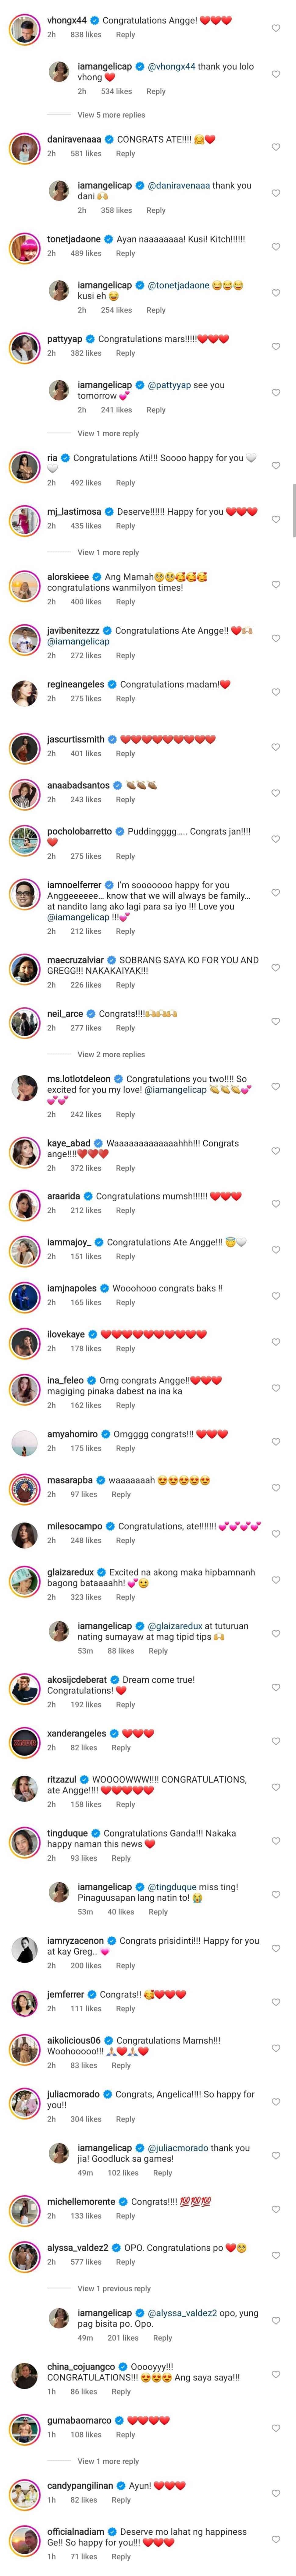 Celebrities react to Angelica Panganiban's pregnancy reveal on social media